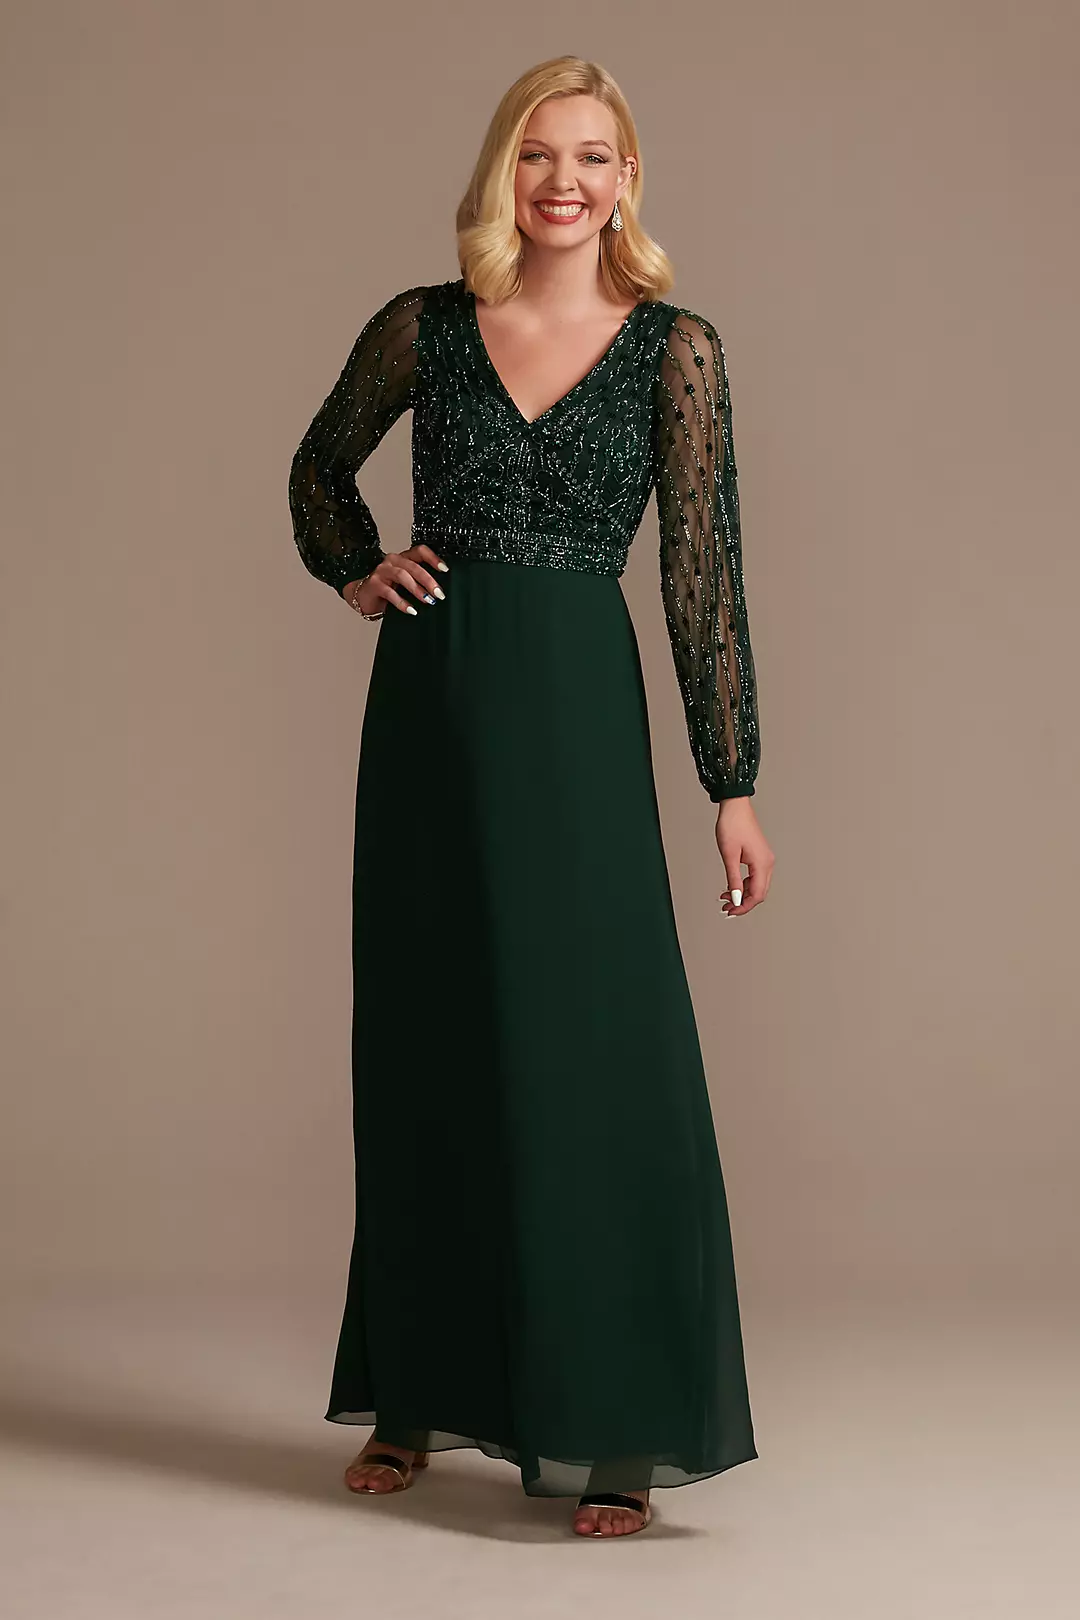 Beaded Chiffon A-Line Dress with Illusion Sleeves Image